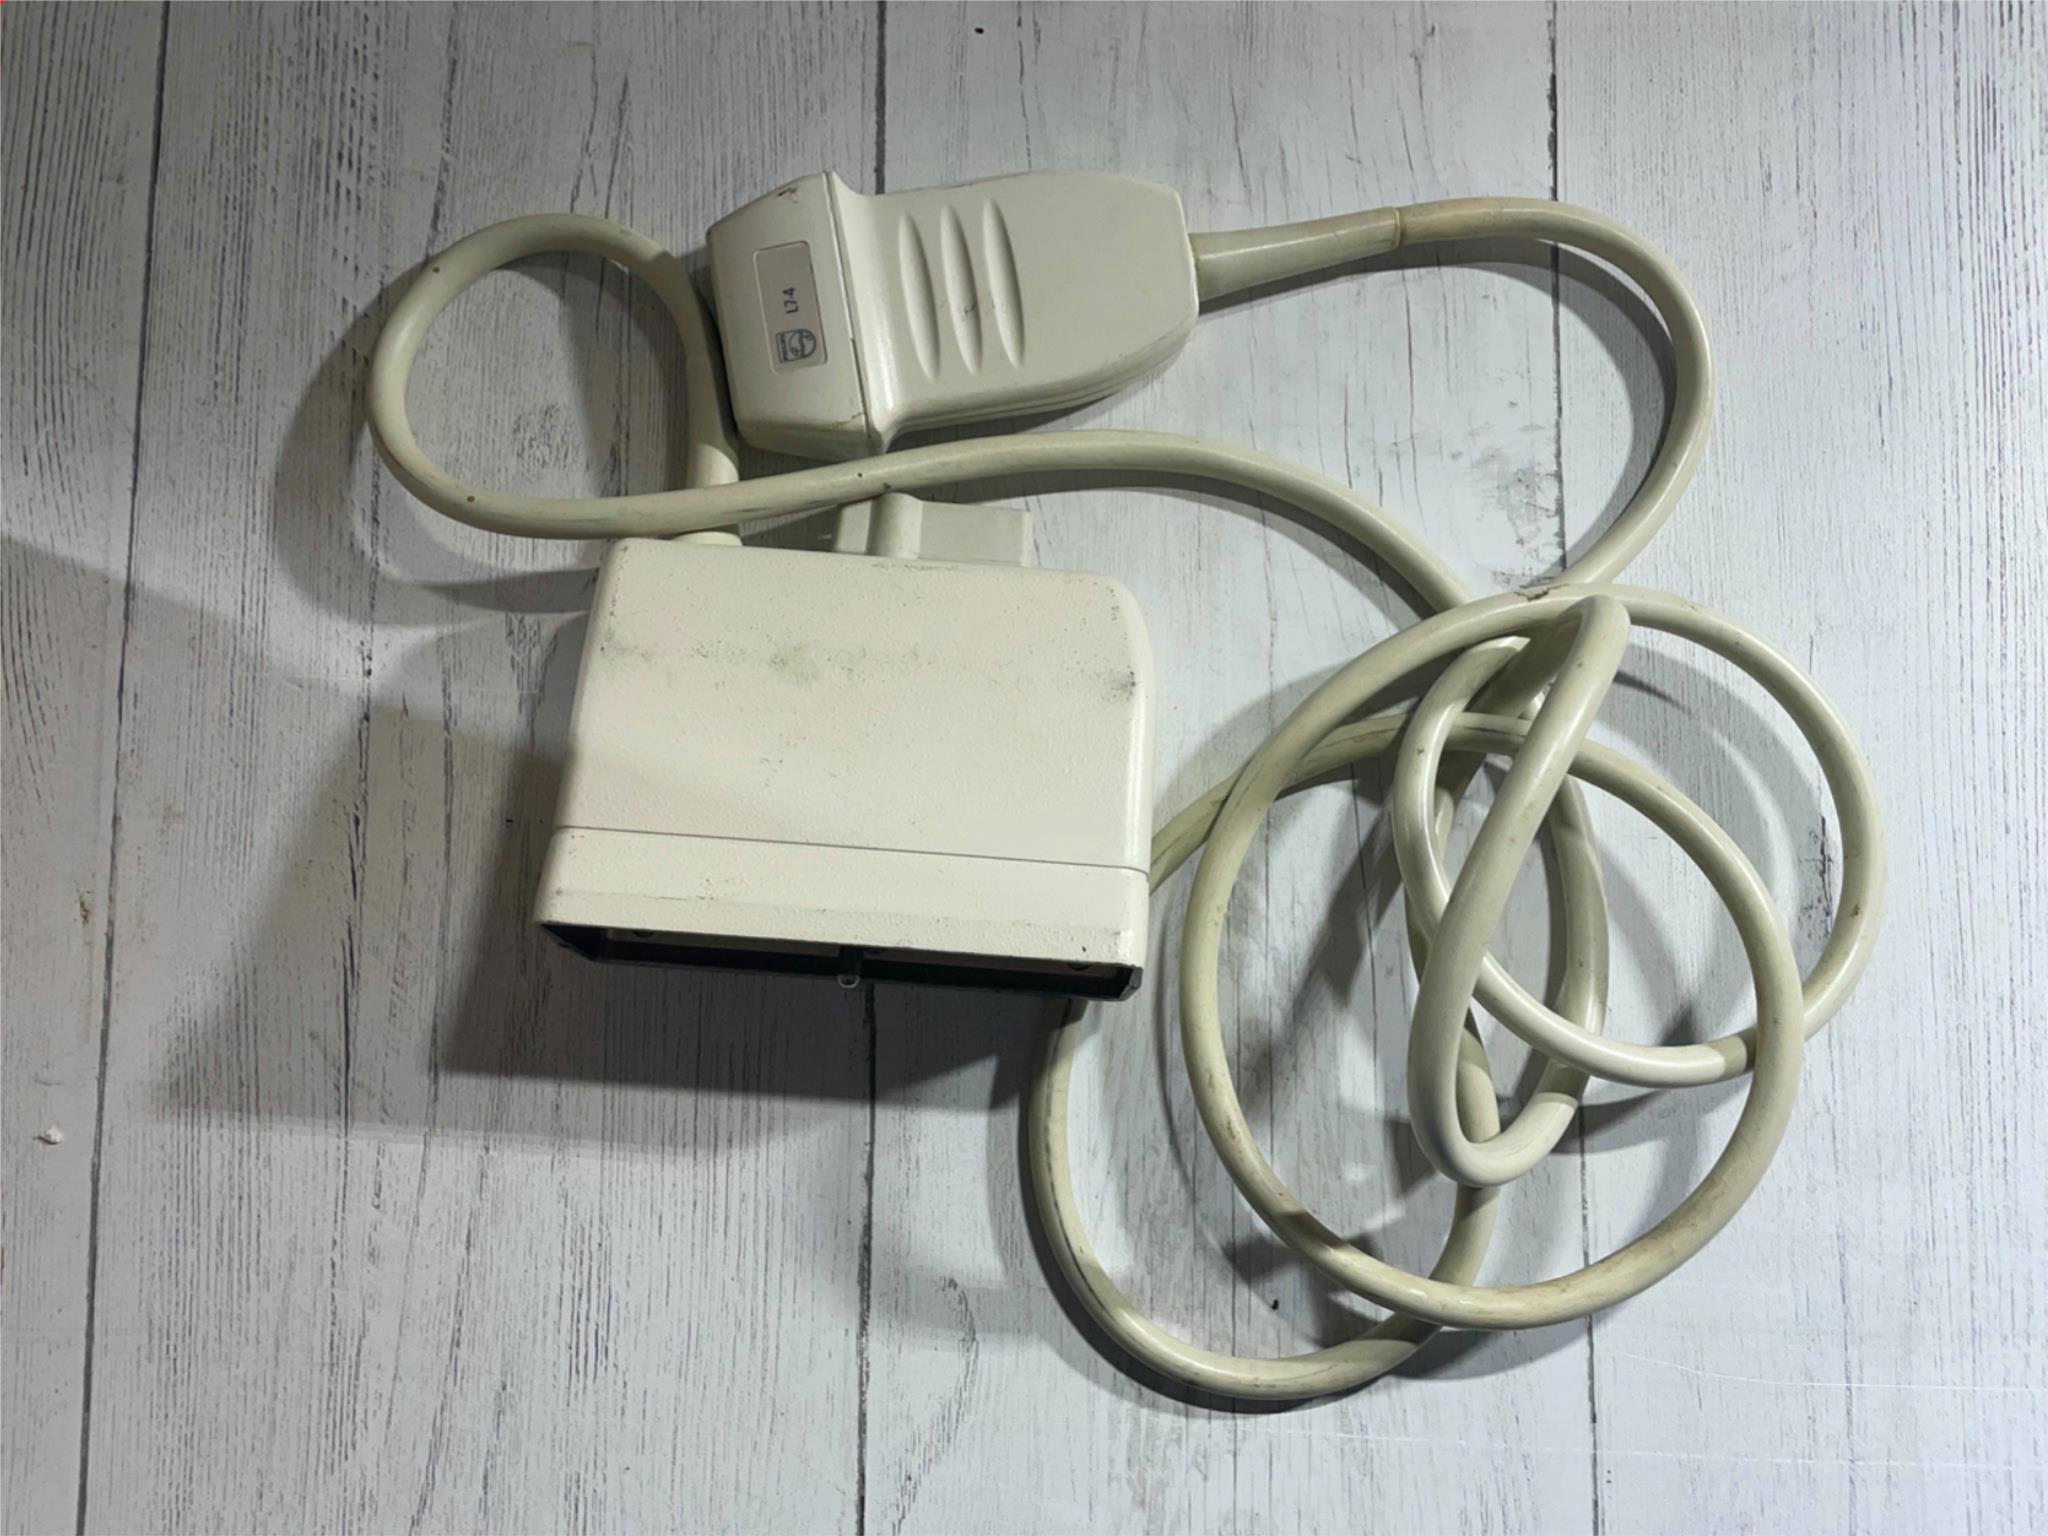 Philips L7-4 Linear Array Ultrasound Transducer Probe SN: 02RQ79 DIAGNOSTIC ULTRASOUND MACHINES FOR SALE